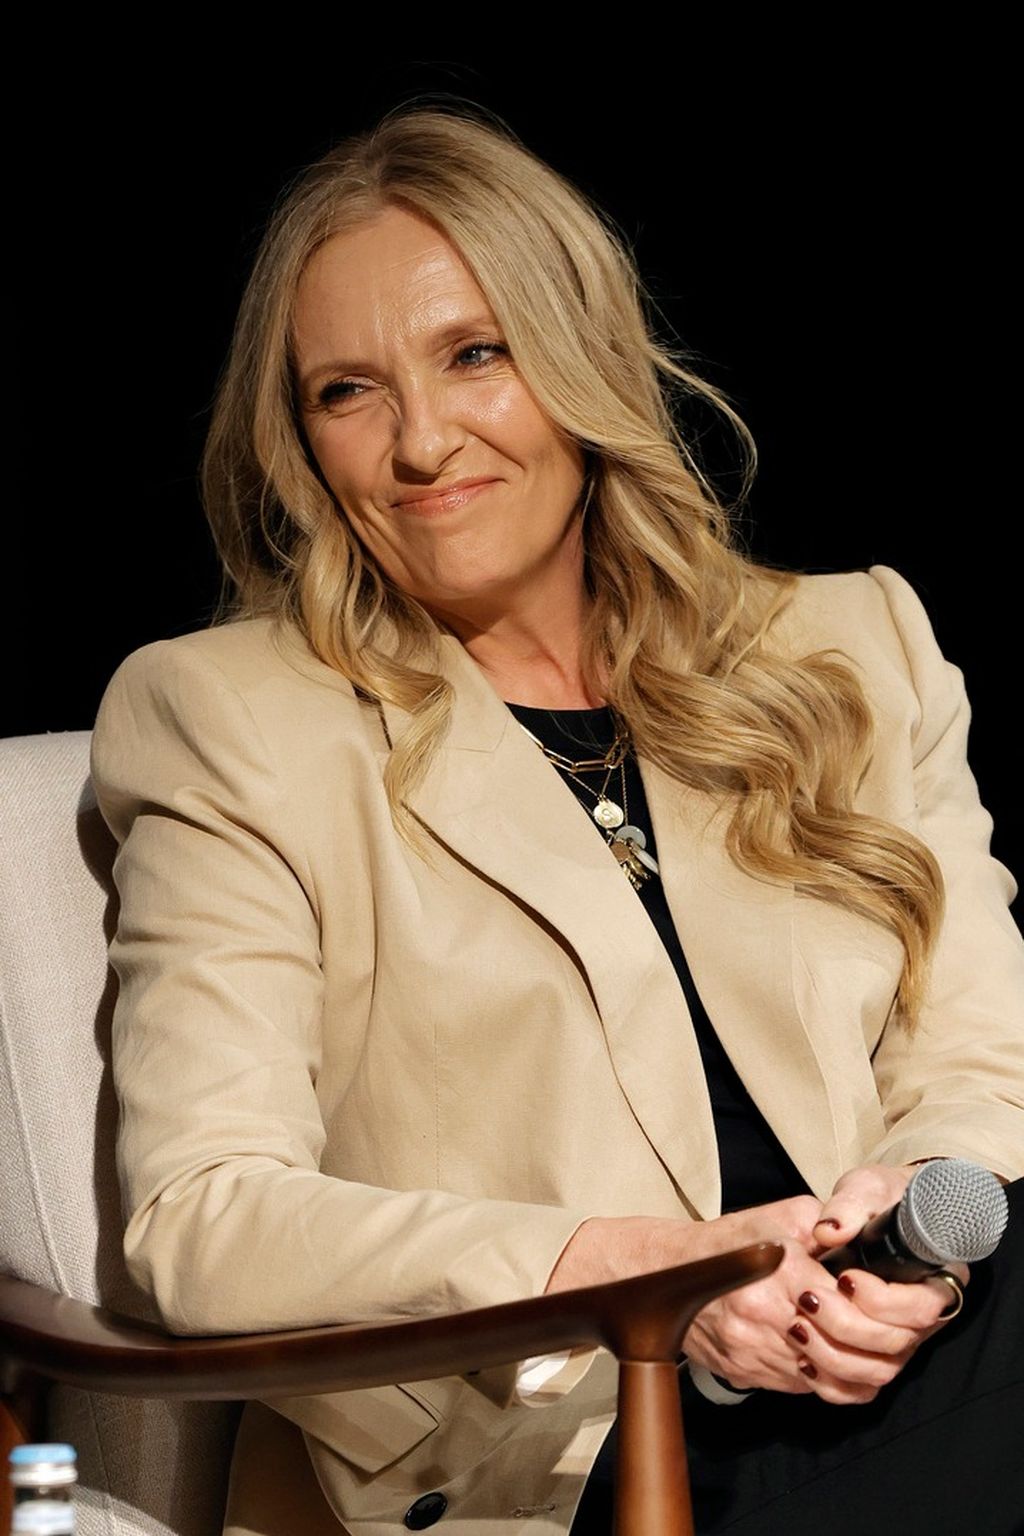 Toni Collette appeared as the keynote speaker in the Qumra Masterclass on the first day of Qumra 2024, held by the Doha Film Institute in Doha, Qatar on Friday (1/3/2024).